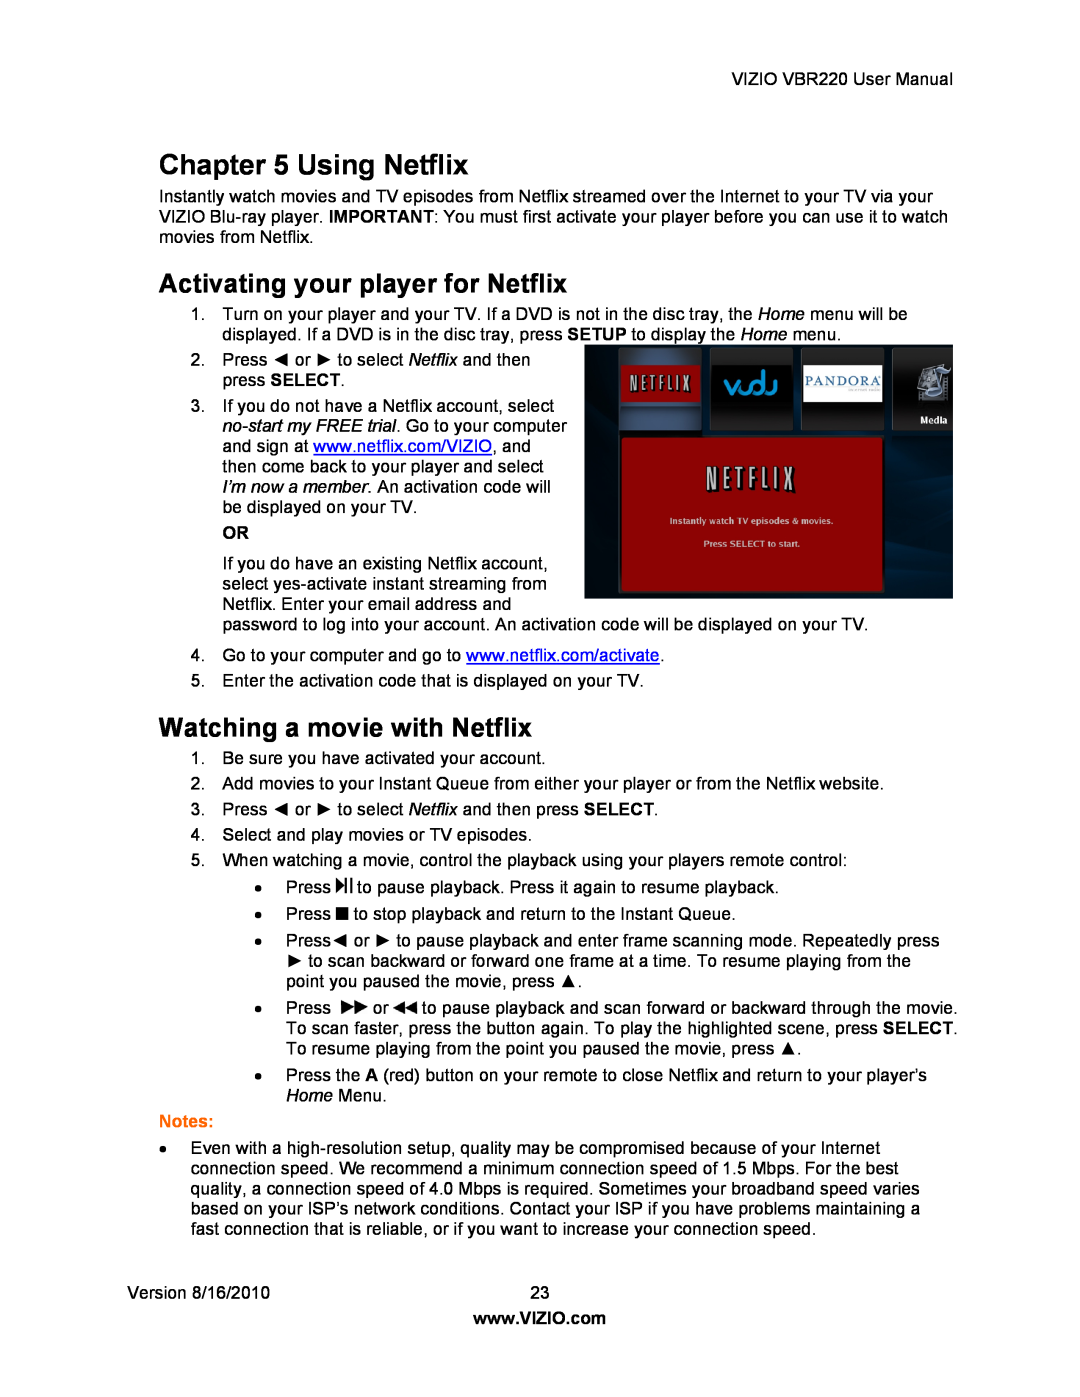 Panasonic VBR220 user manual Using Netflix, Activating your player for Netflix, Watching a movie with Netflix 